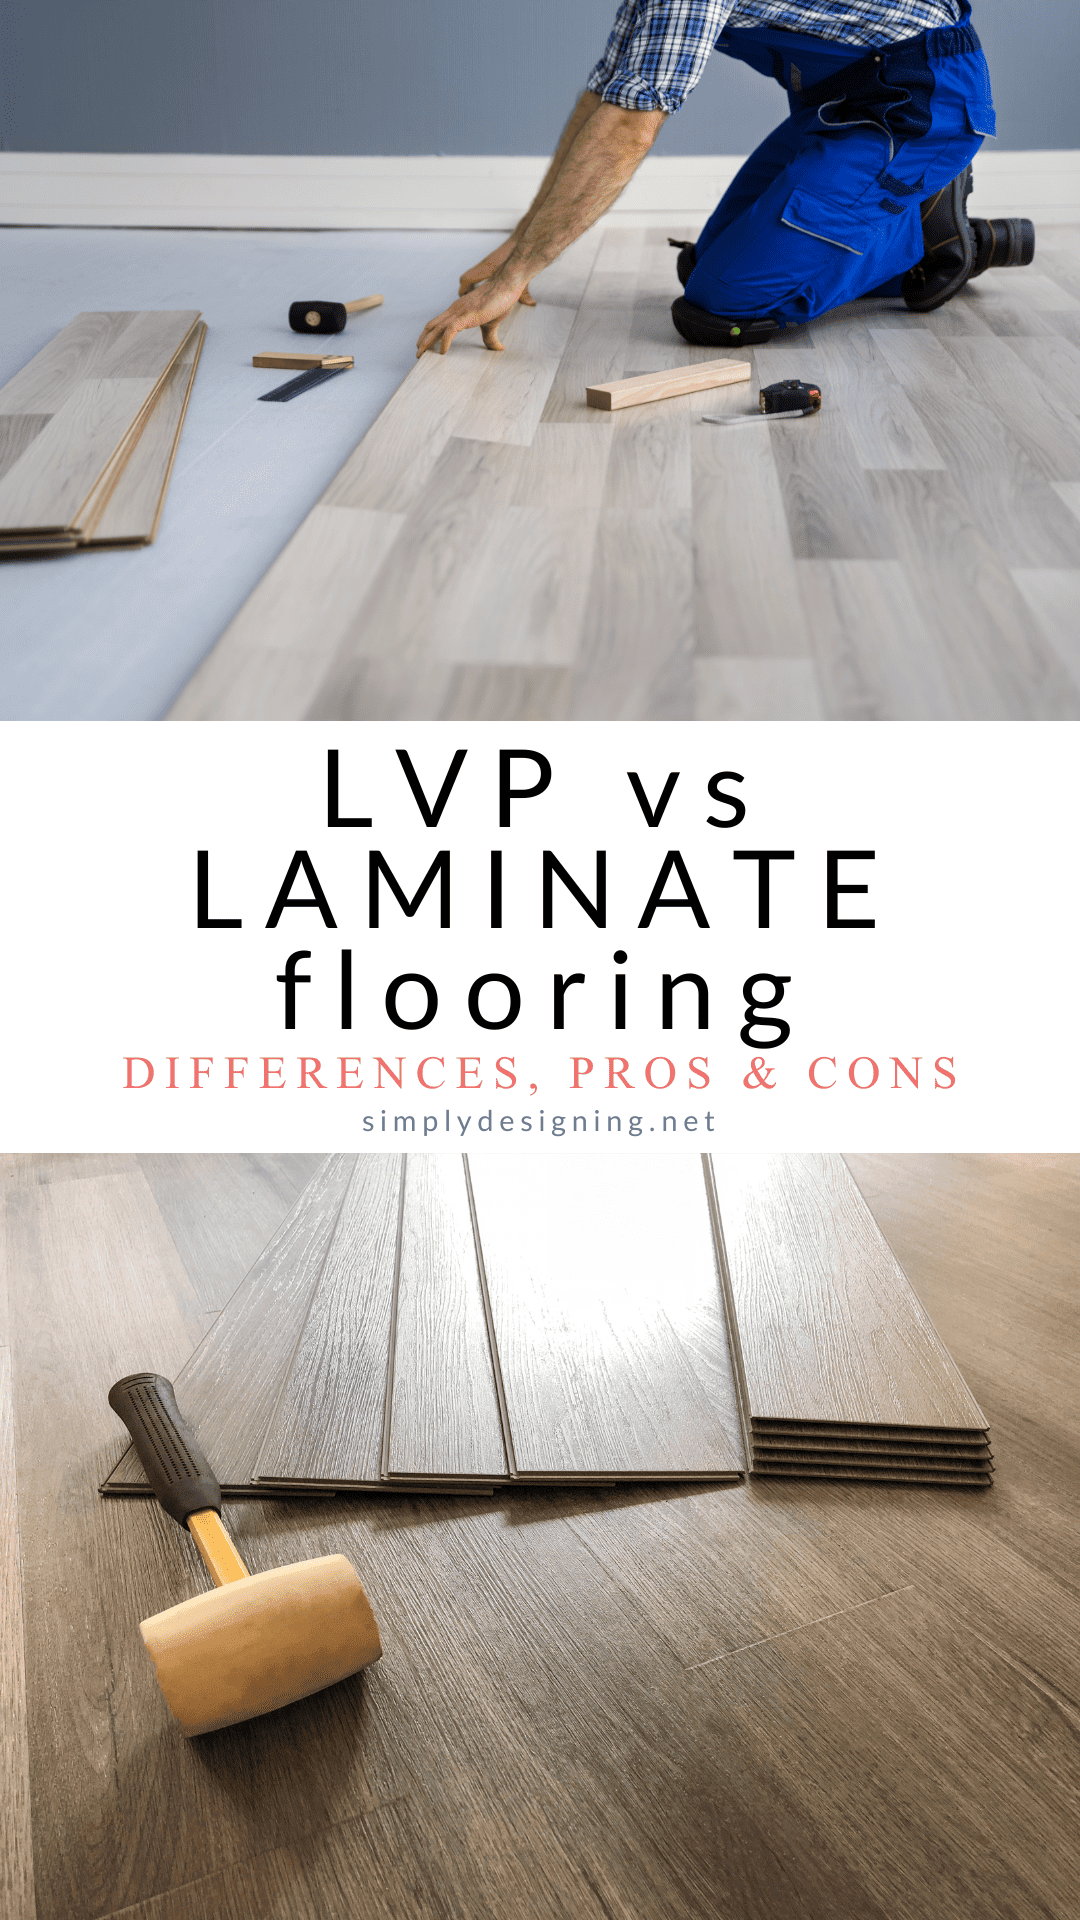 Pinterest style image with photo of person installing lvp flooring and another photo of laminate flooring with text that says LVP vs LAMINATE FLOORING, differences, pros & cons